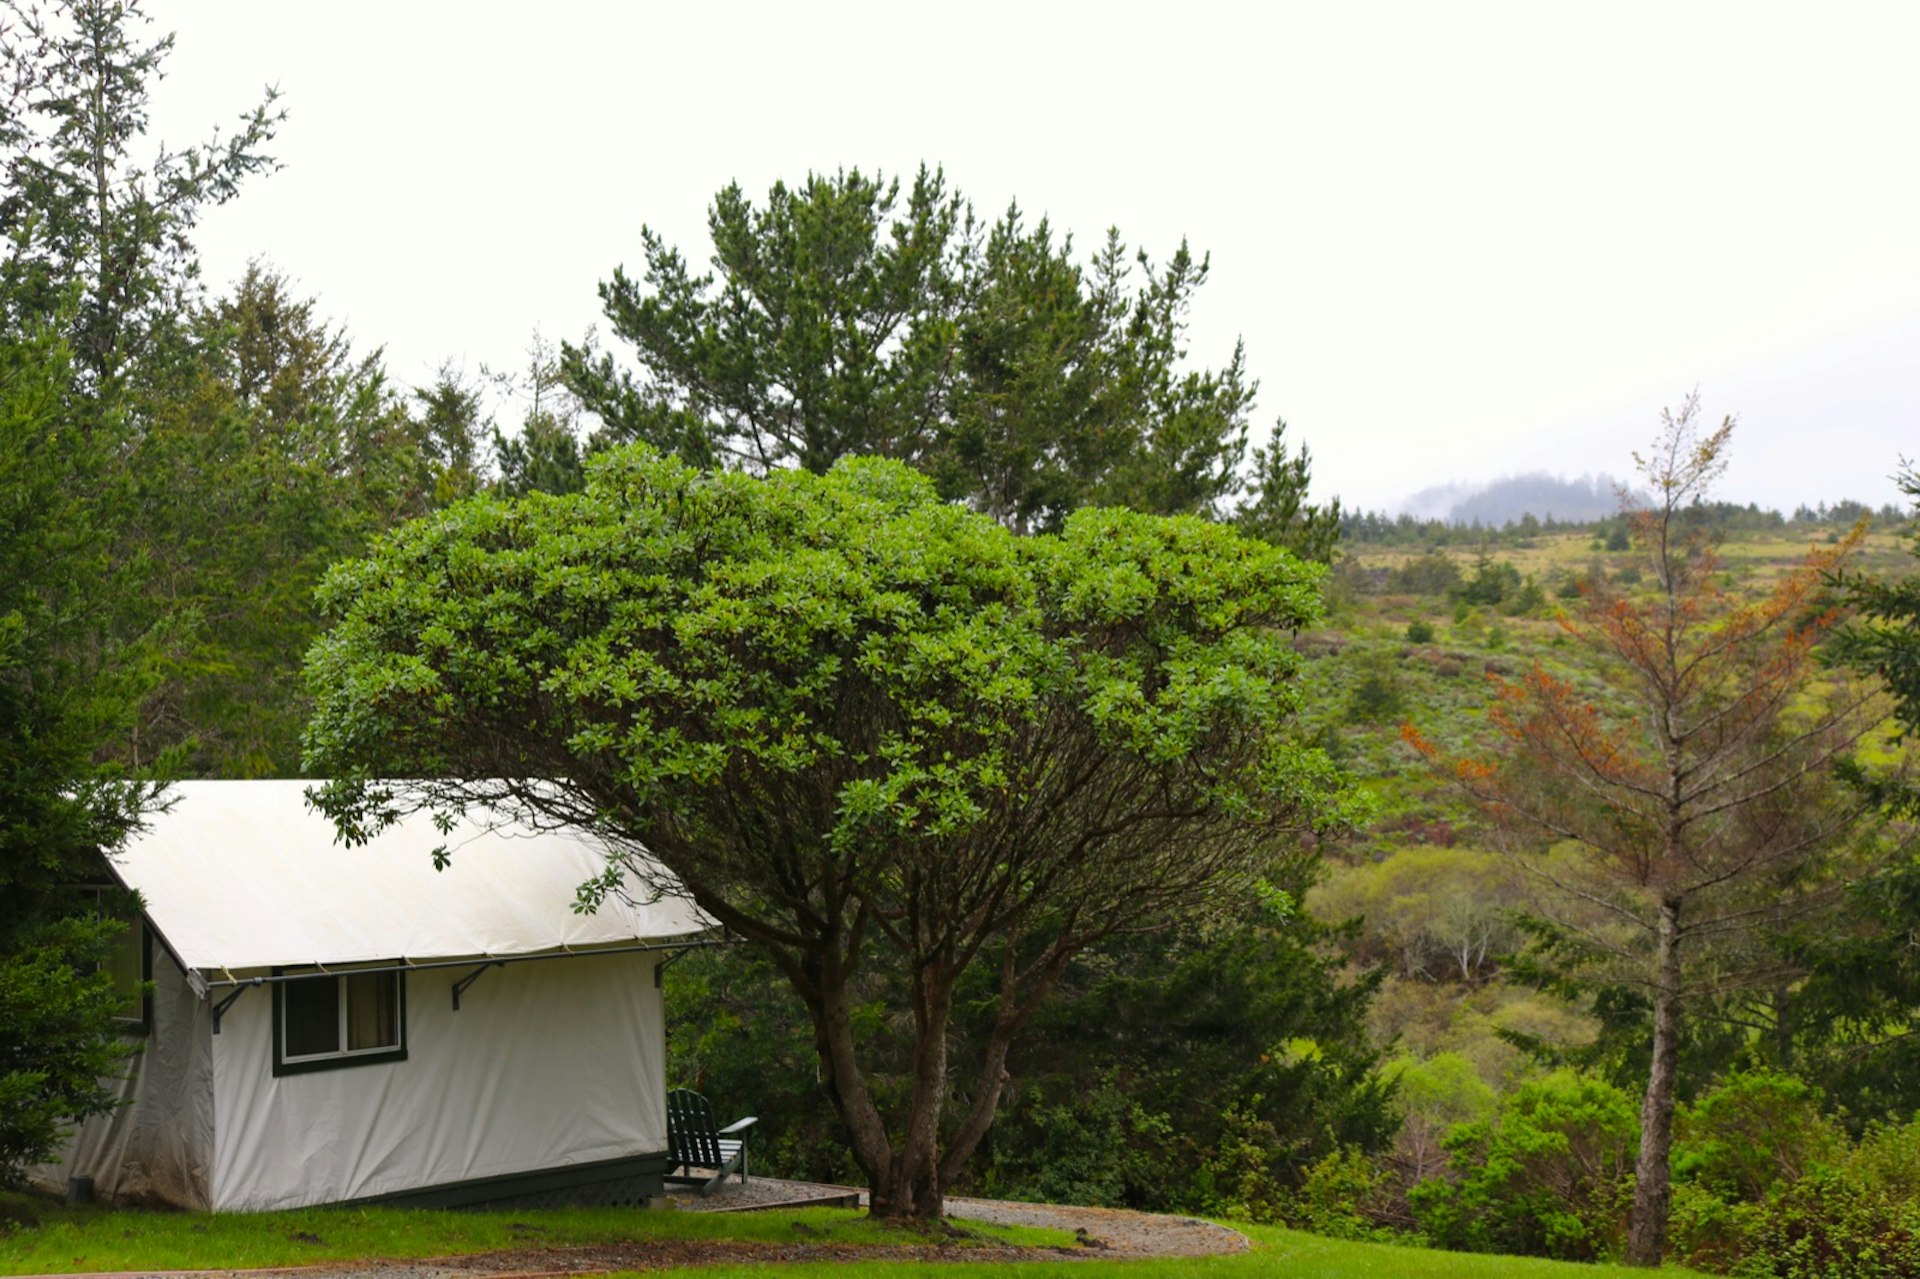 A white tent overlooks a verdant valley next to a large leafy tree